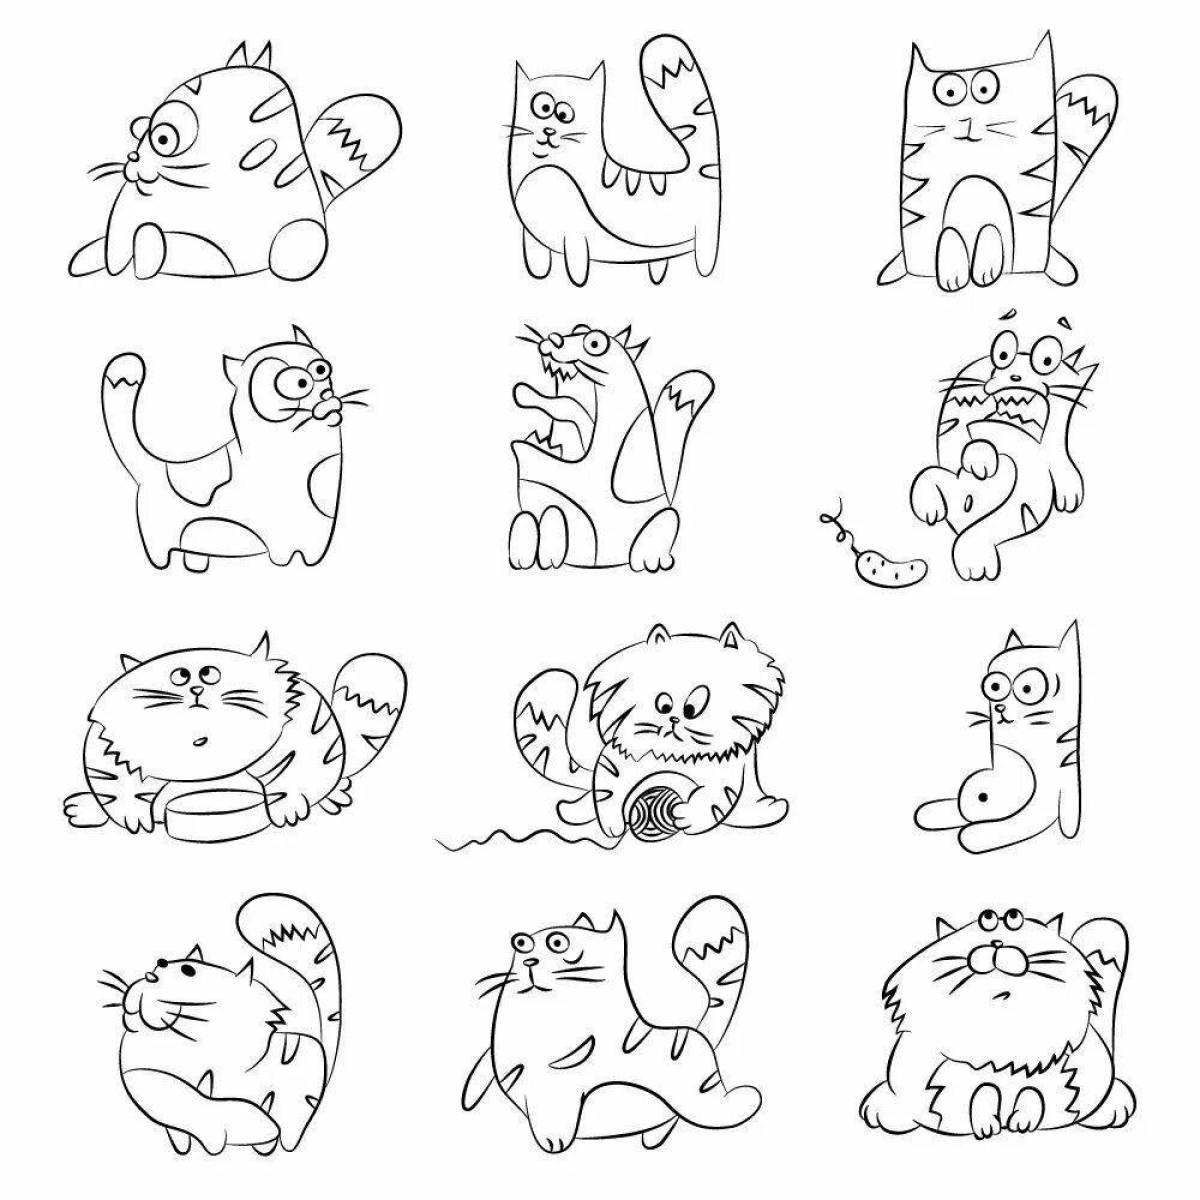 Witty cat sticker coloring page